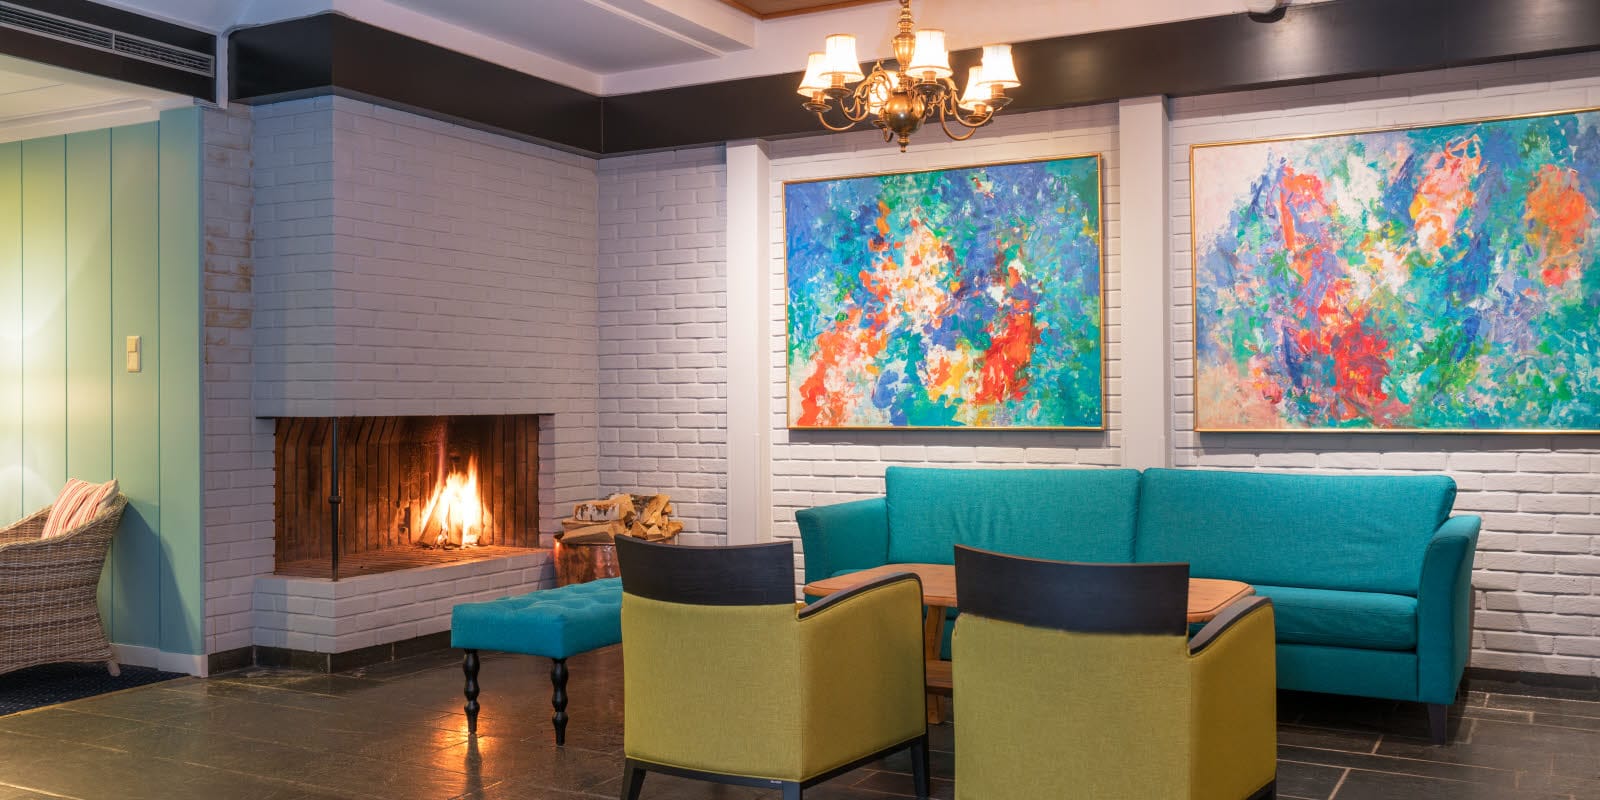 Lobby with seating area in fresh colours, fireplace and artwork on the walls of Thon Hotel Skeikampen